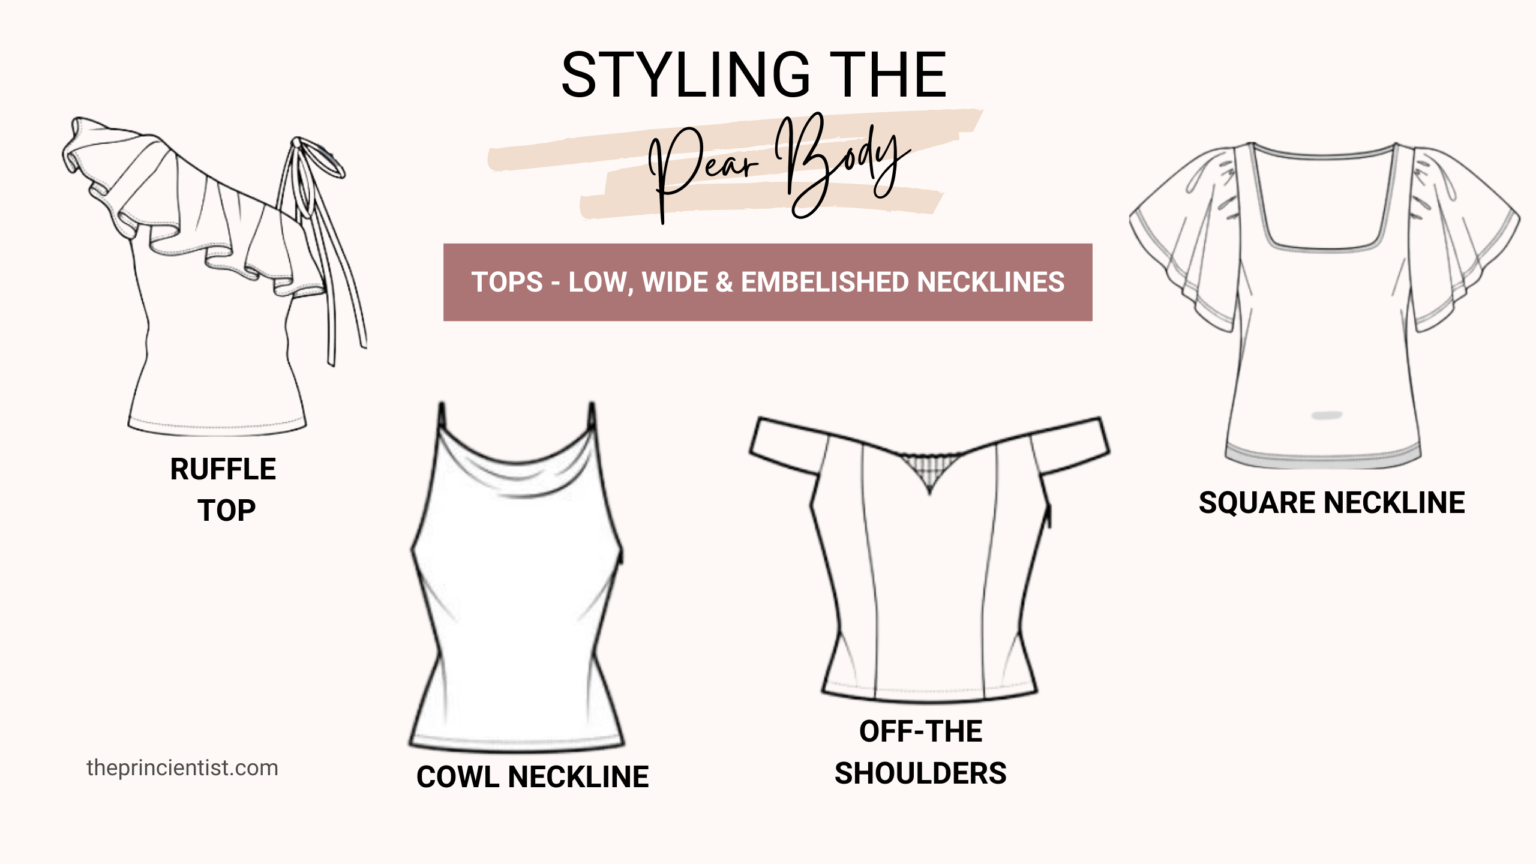 how to dress the pear shaped body - tops for the pear body 2 - low and wide & embellished necklines